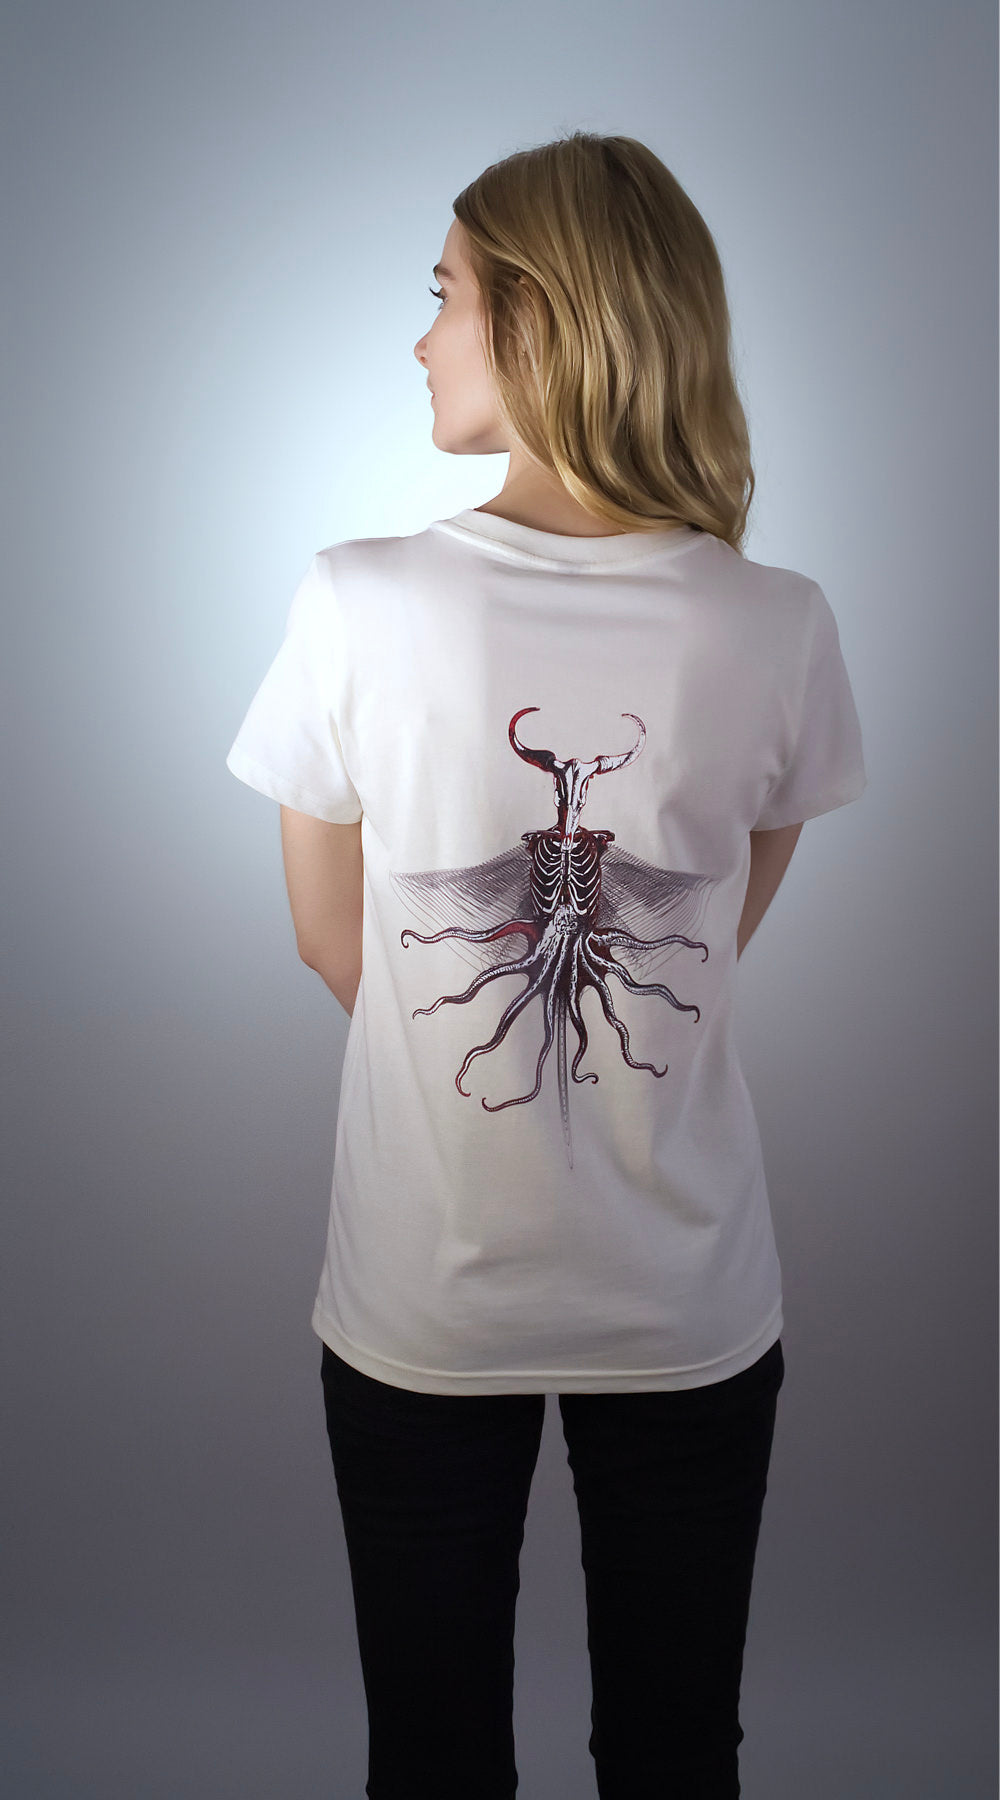 Women's natural limited edition Art-Shirt 'OctoBeast' by Steven Fellowes, GOTS certified organic cotton, back view